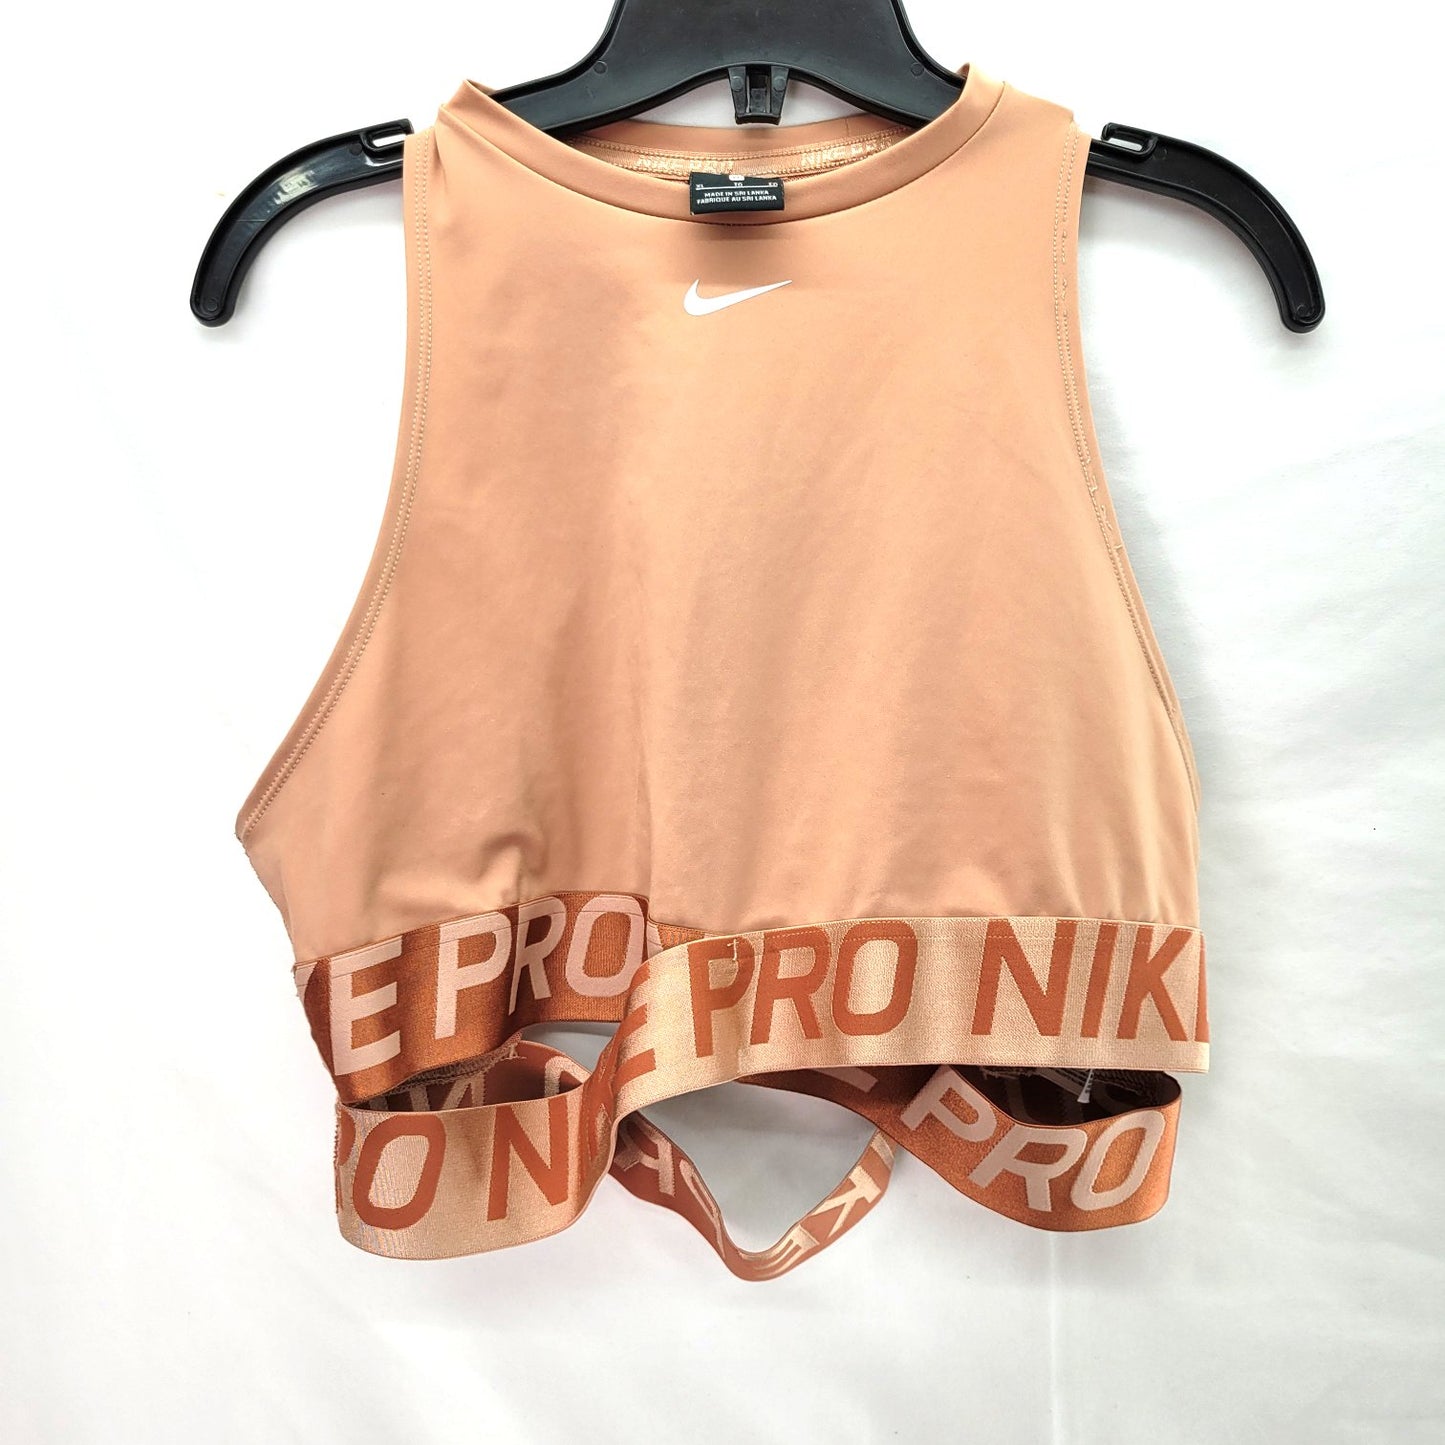 Nike Pro Crossover Women's Tank Top Brown - Size XL